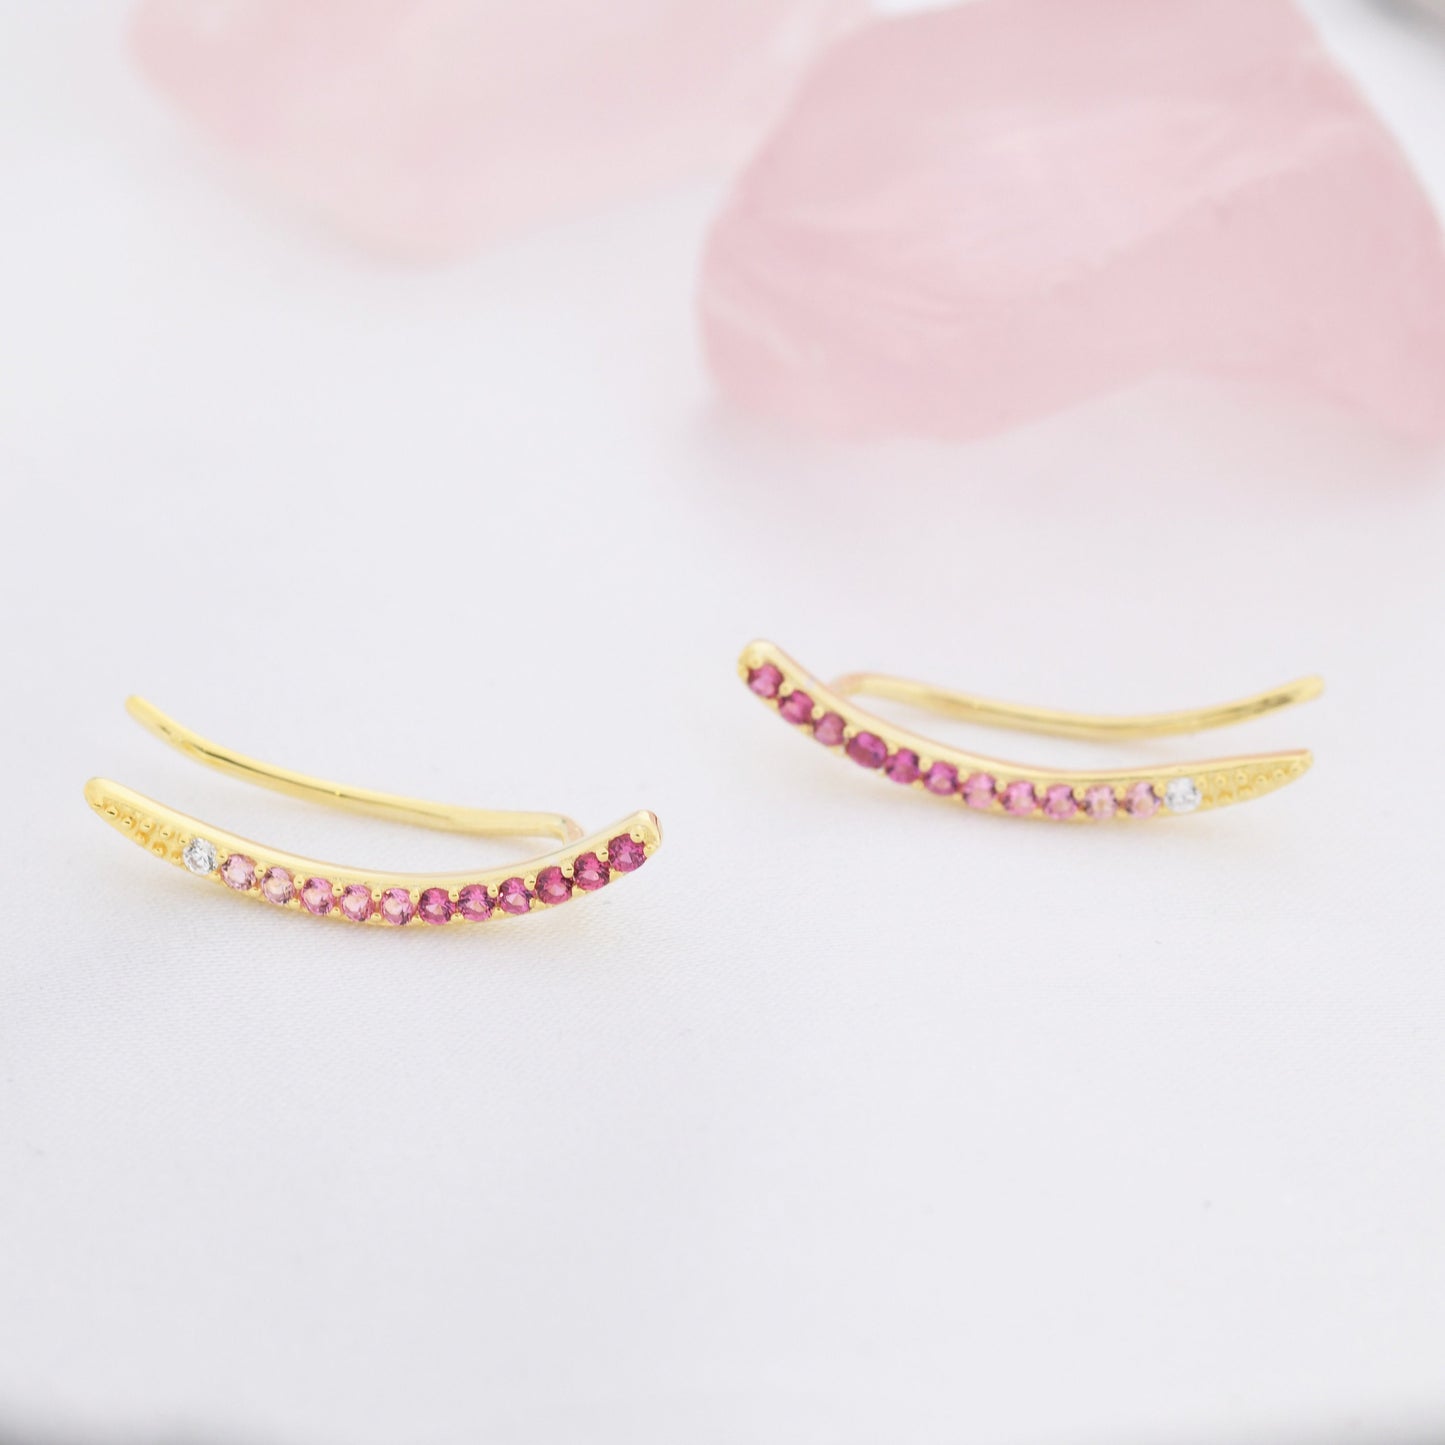 Ombre Ruby Pink CZ Crawler Earrings in Sterling Silver, Silver or Gold, Gradient Colour Ear Crawlers, July Birthstone Ear Climbers